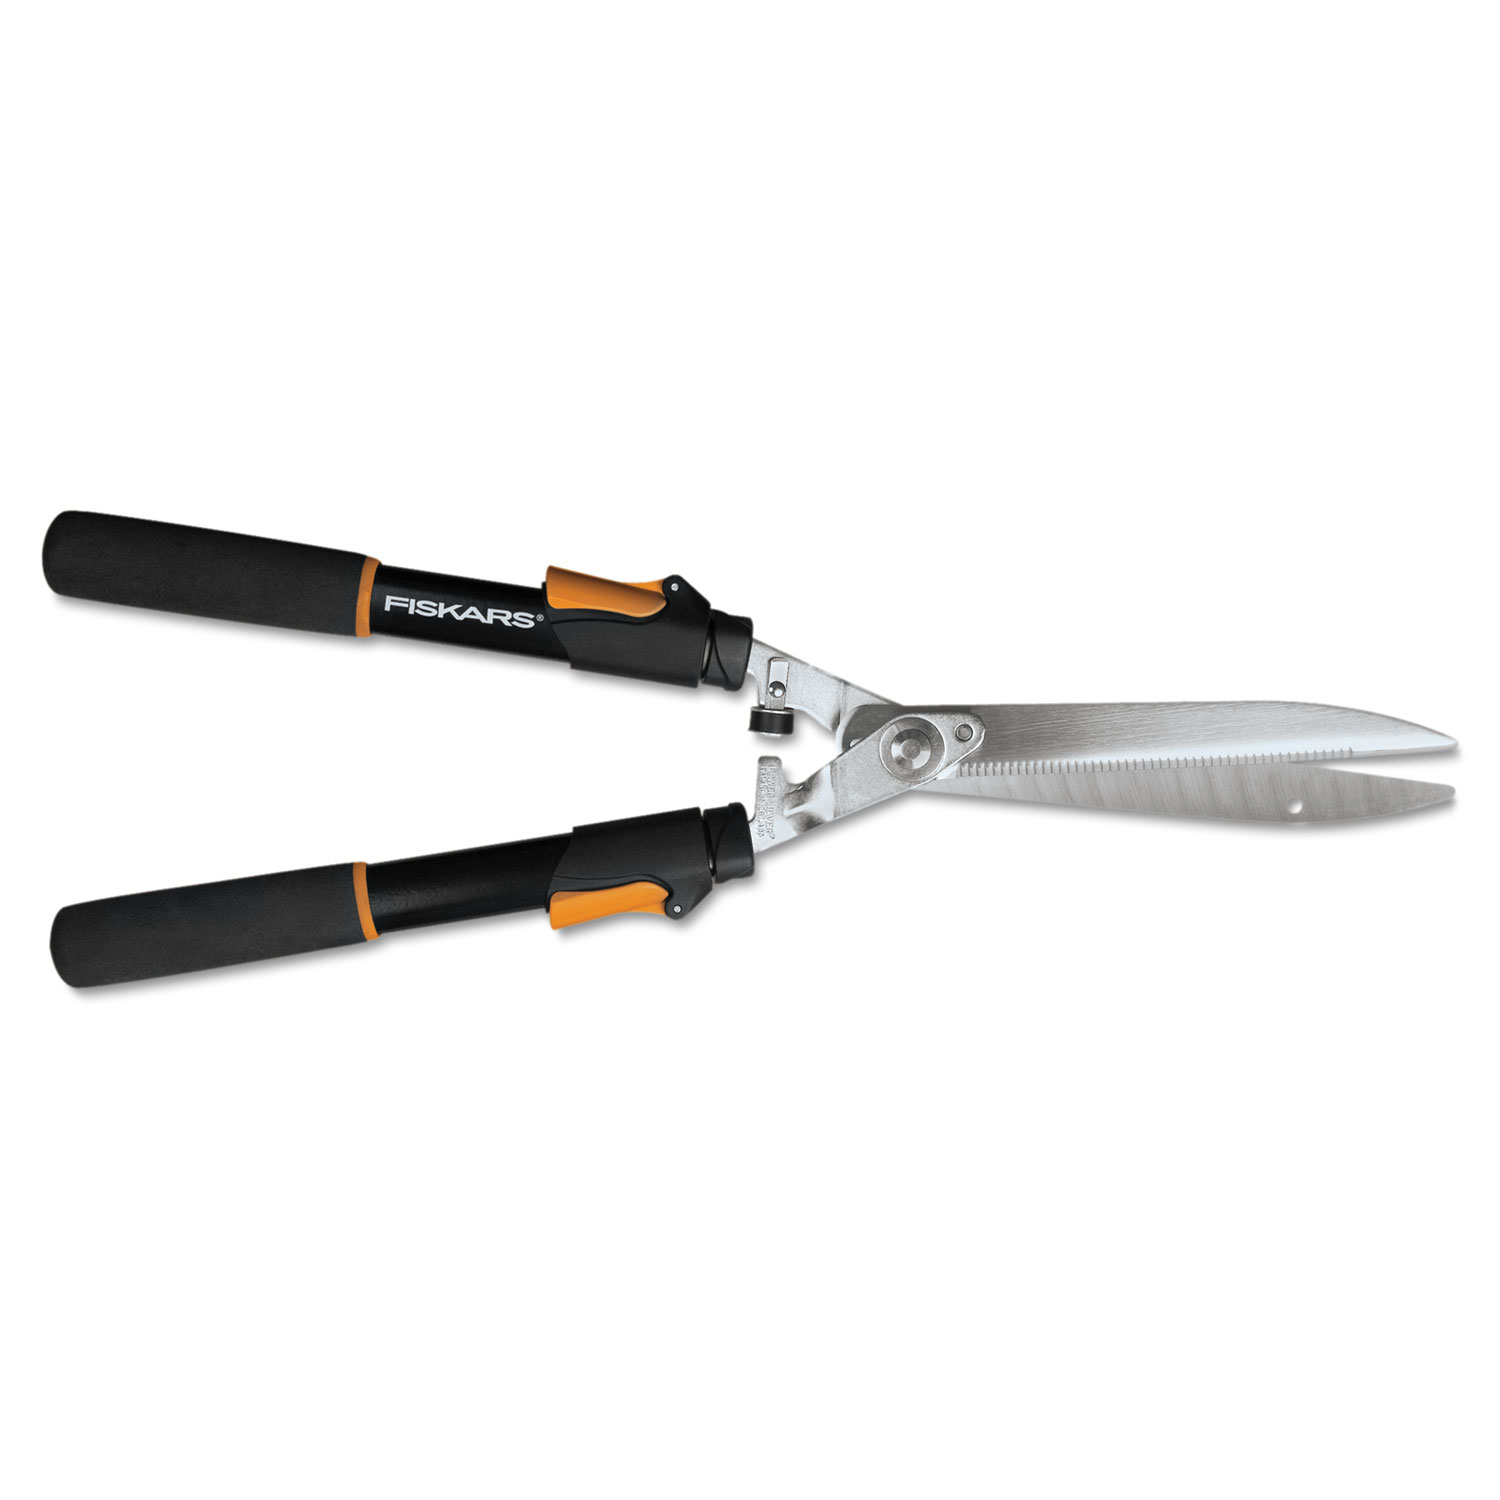 Telescoping Power-Lever Hedge Shears, Cushioned Grip